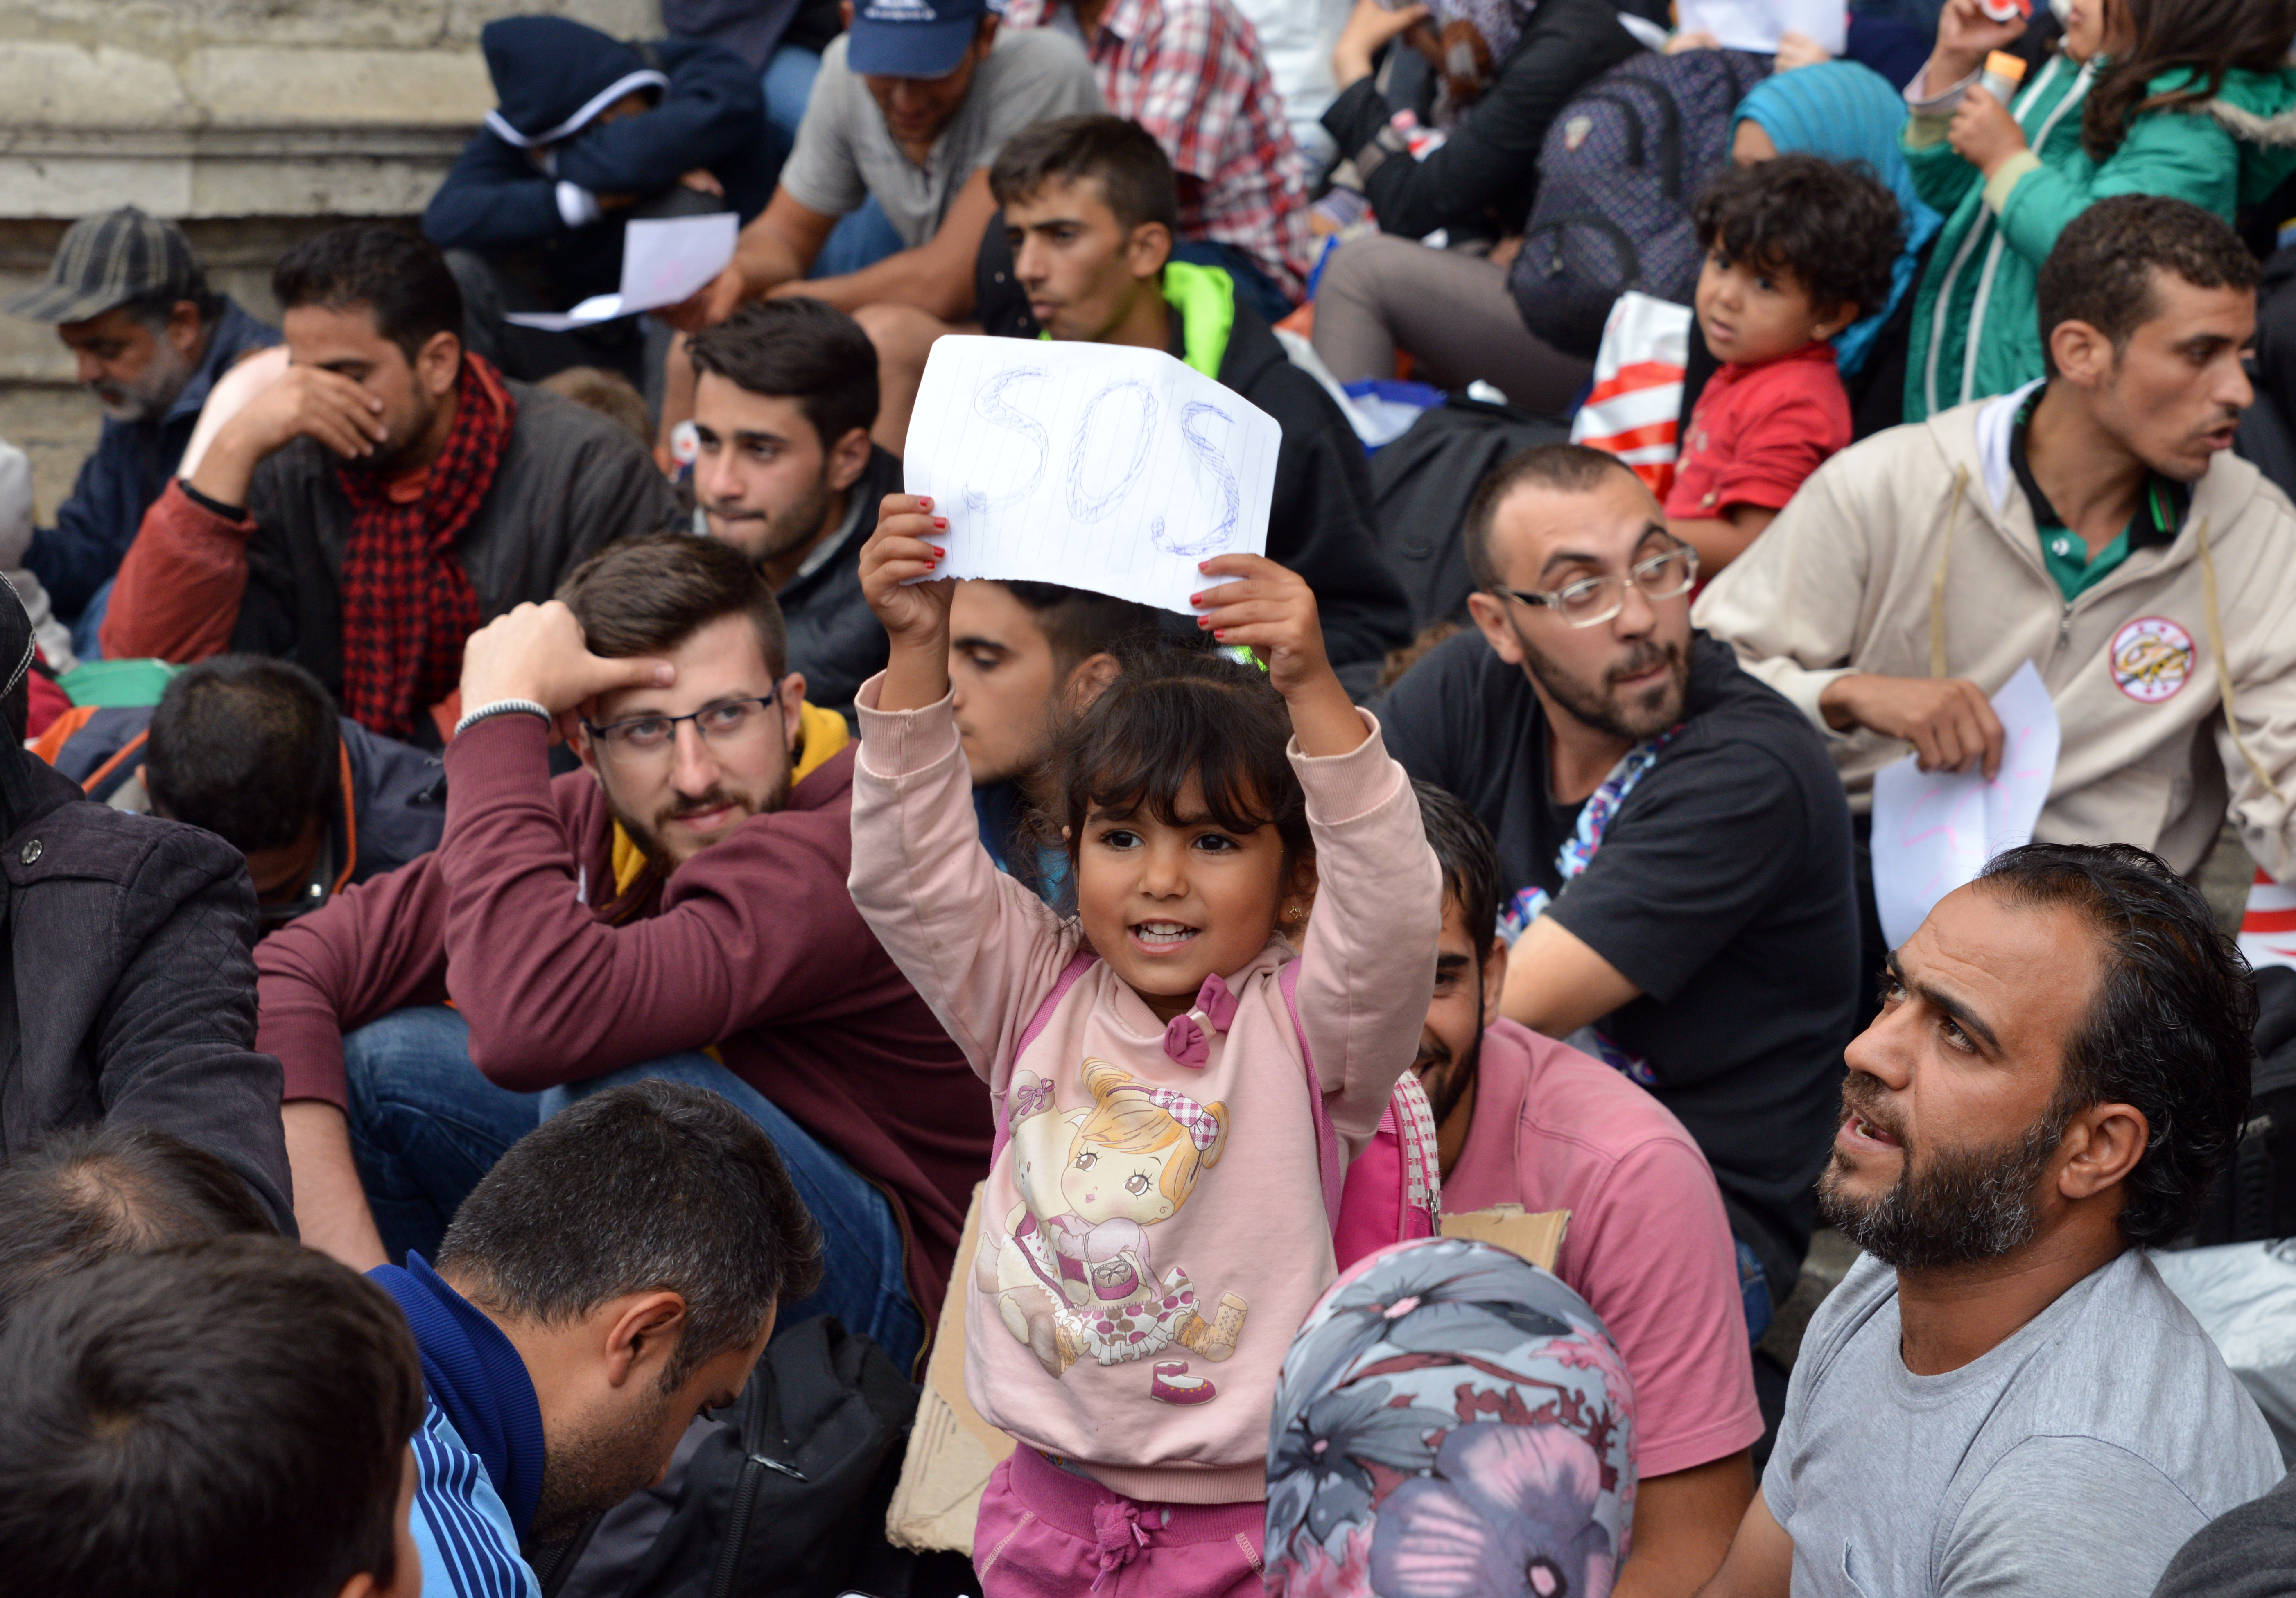 Group of people gather on the ground while a little girl holds up a piece of paper that reads sos